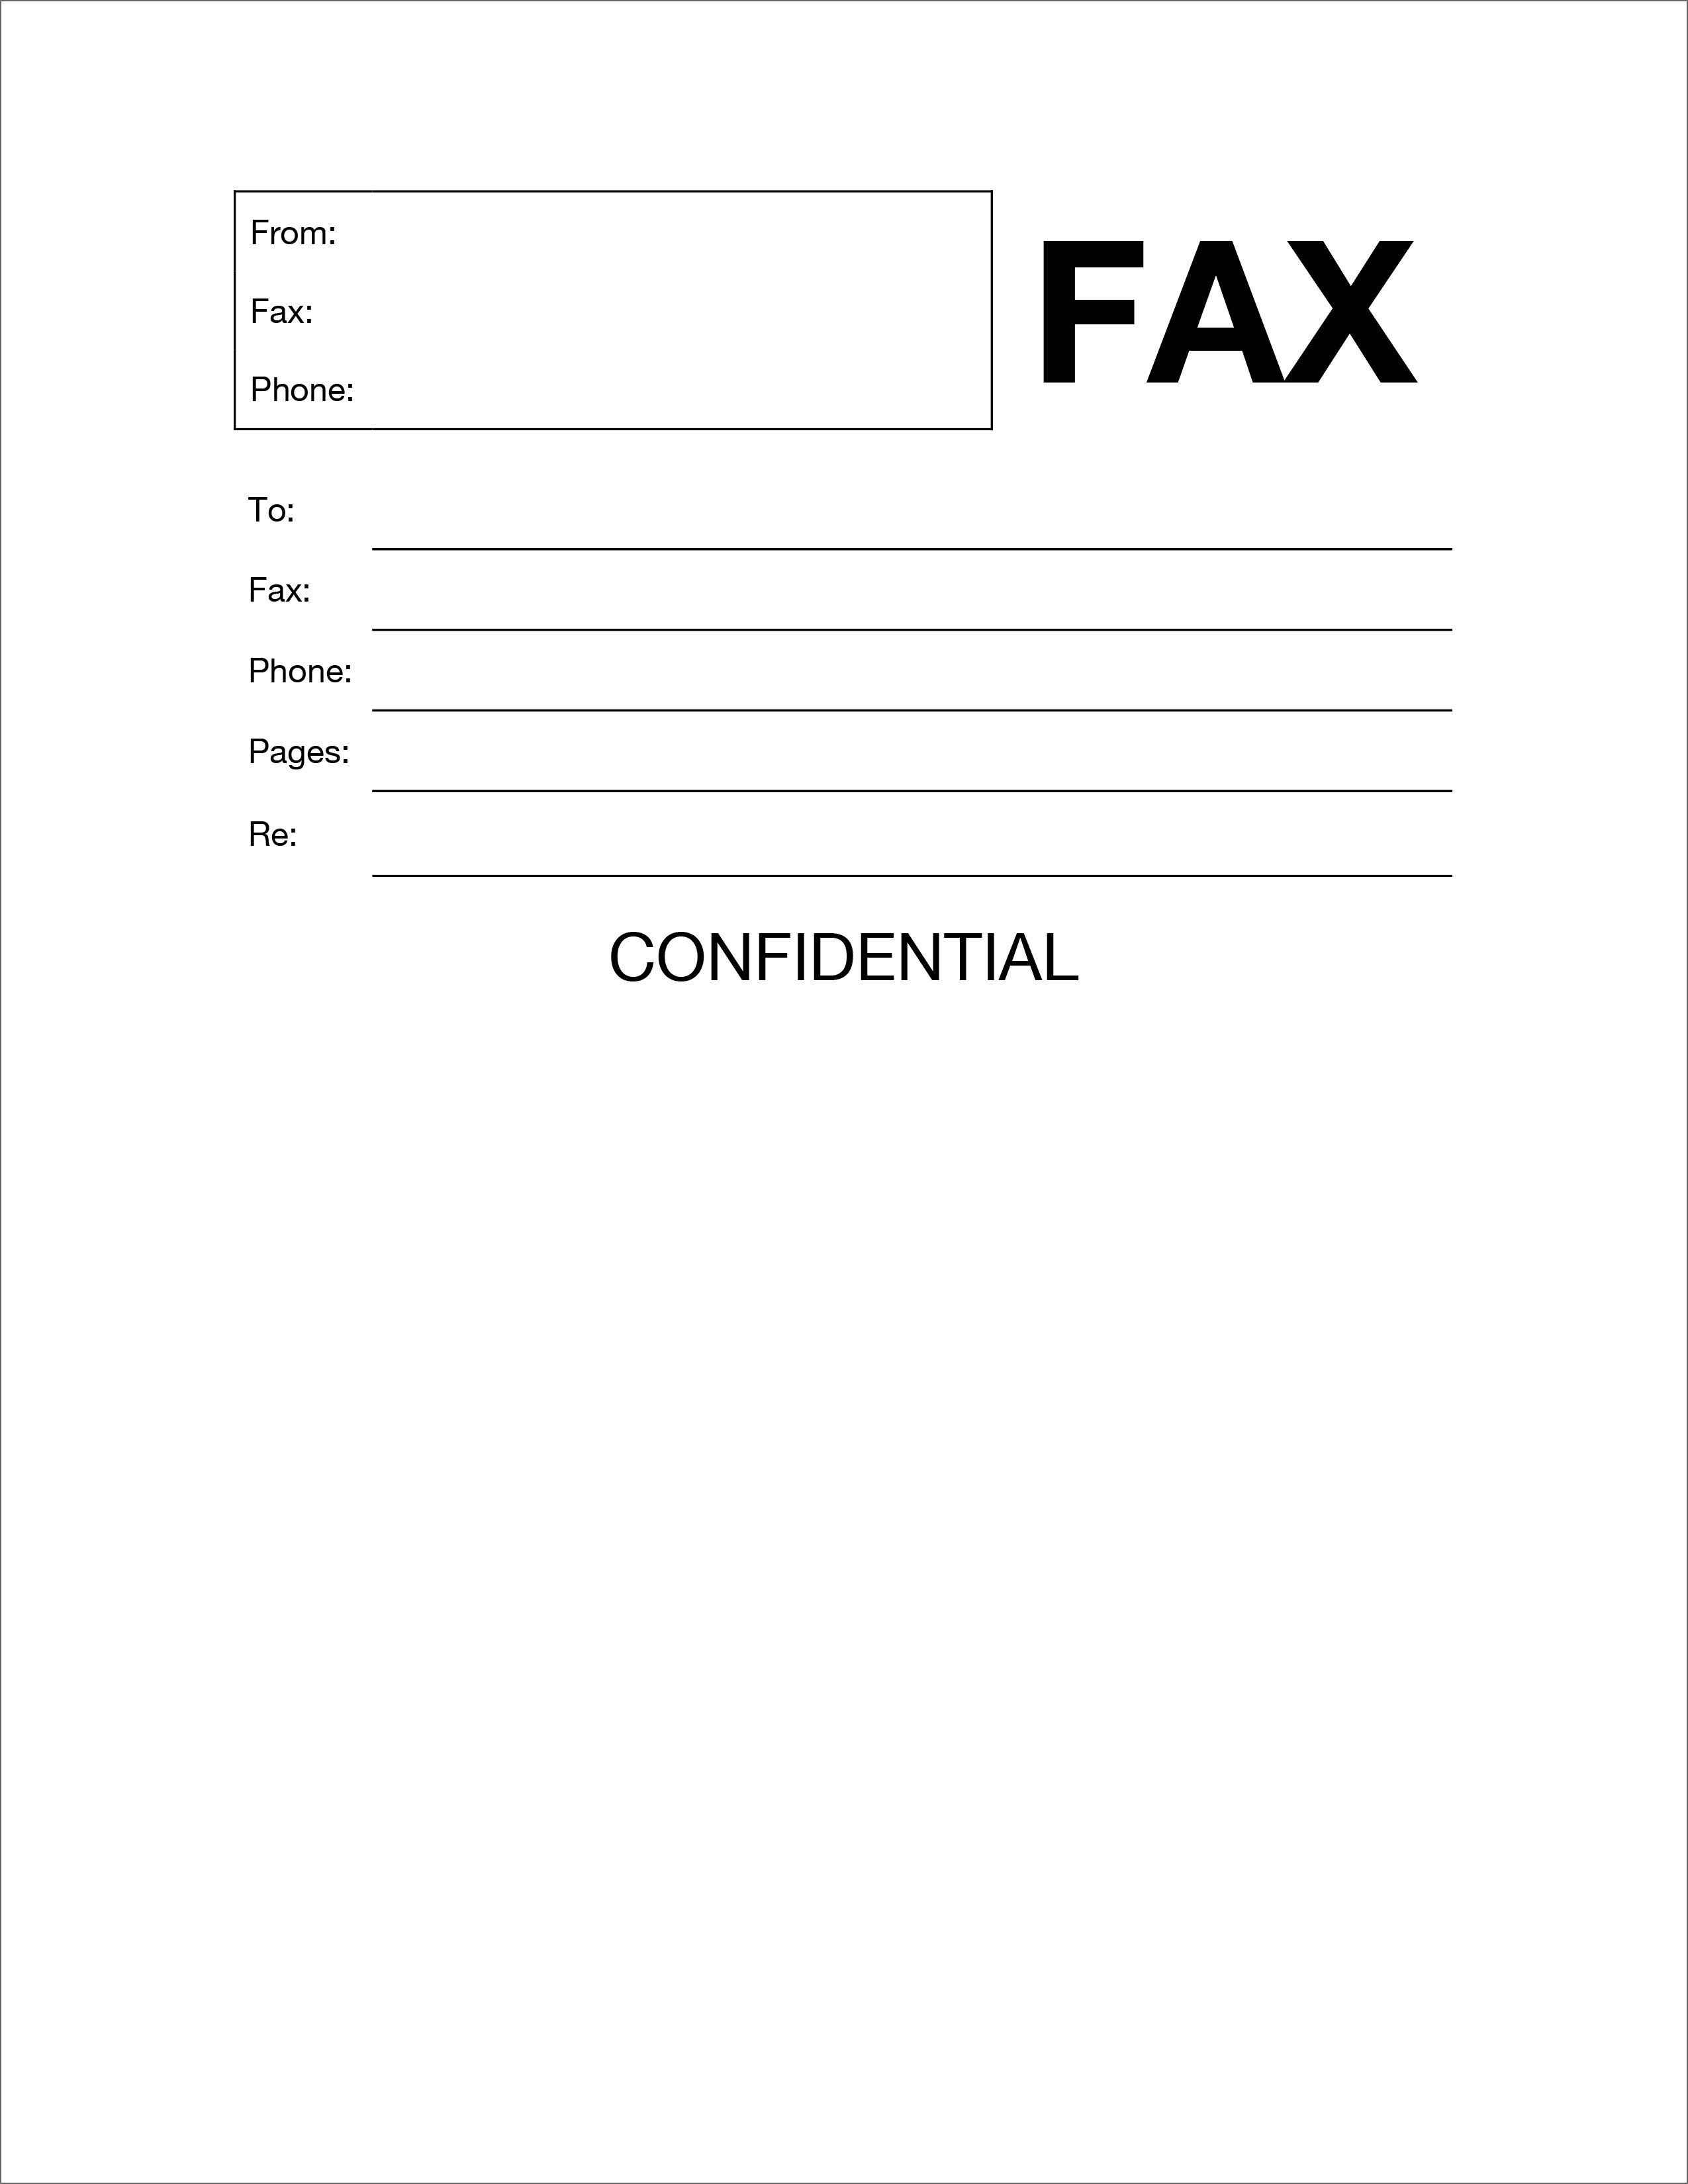 Fax Cover Letter Template 20 Free Fax Cover Templates Sheets In Microsoft Fice Docx